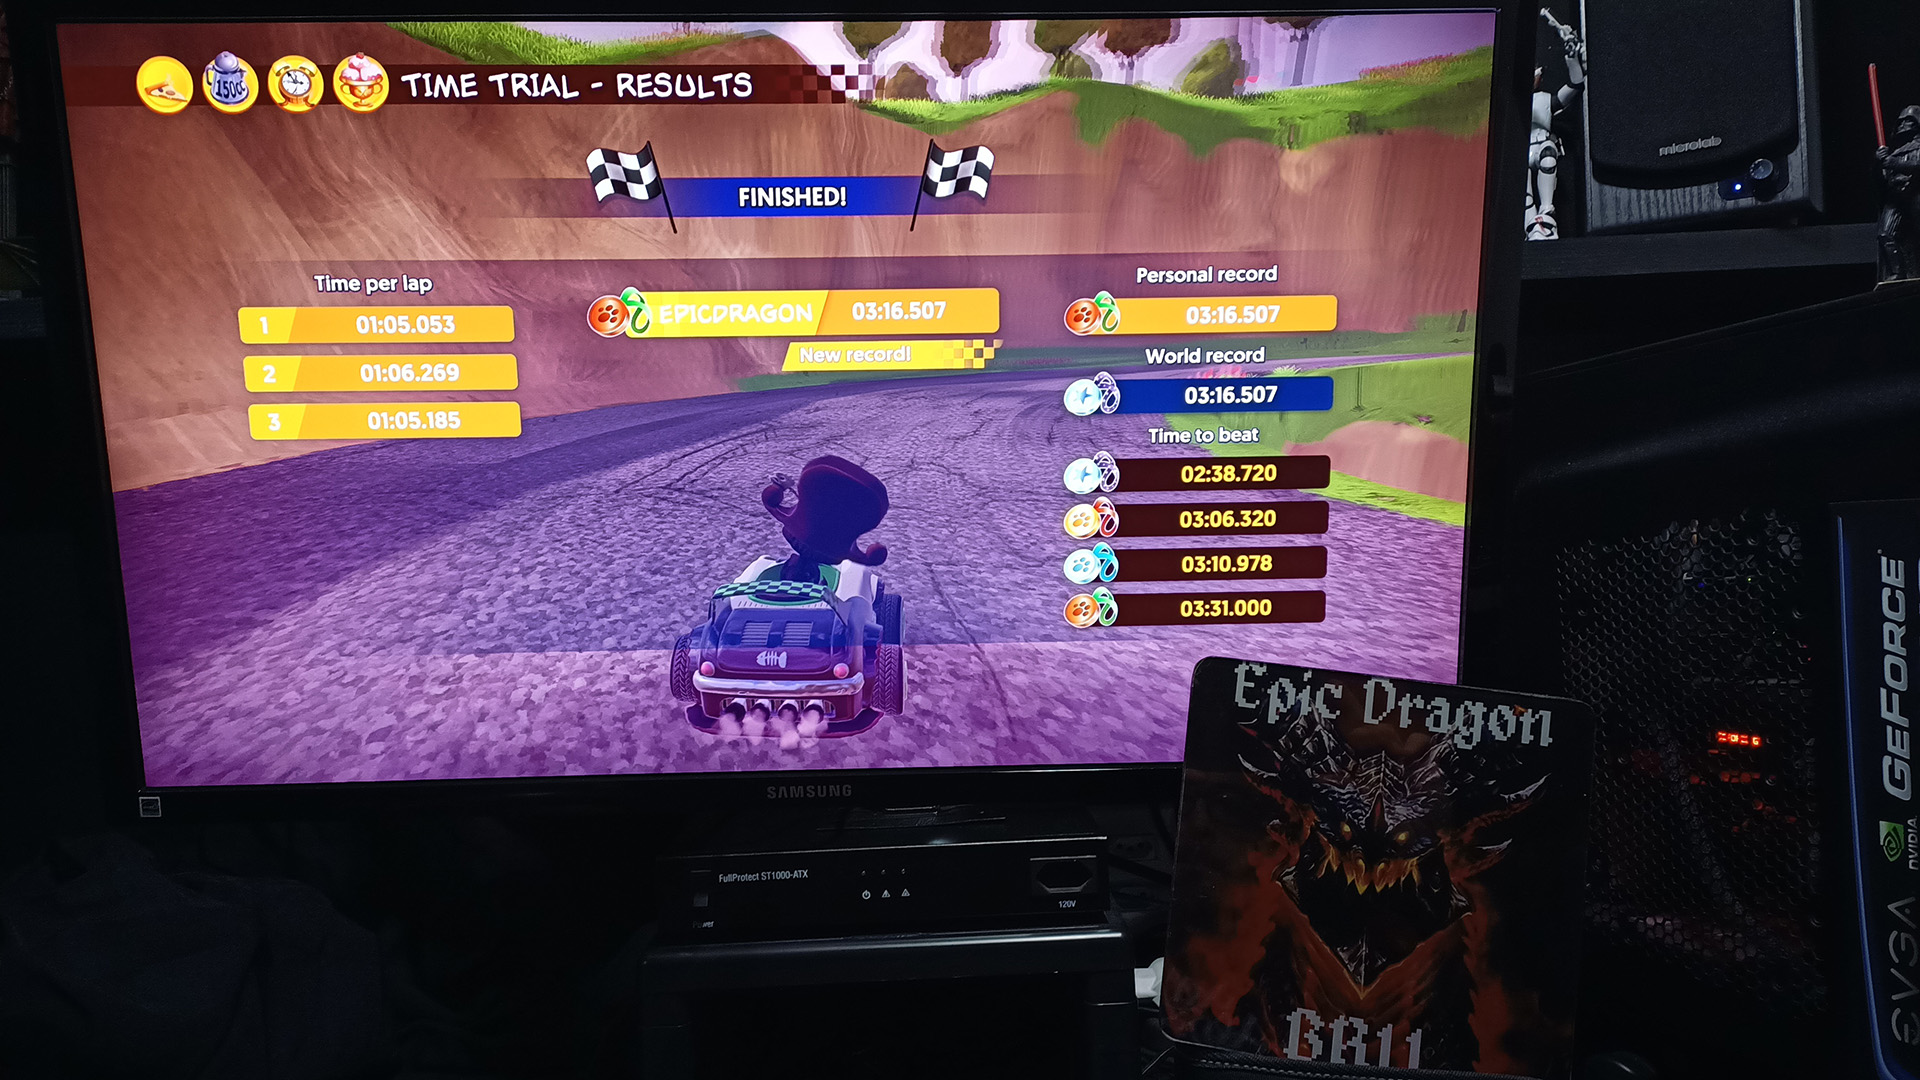 EpicDragon: Garfield Kart Furious Racing: Loopy Lagoon [Time Trial: 3 Laps] (PC) 0:03:16.507 points on 2022-08-11 17:25:46